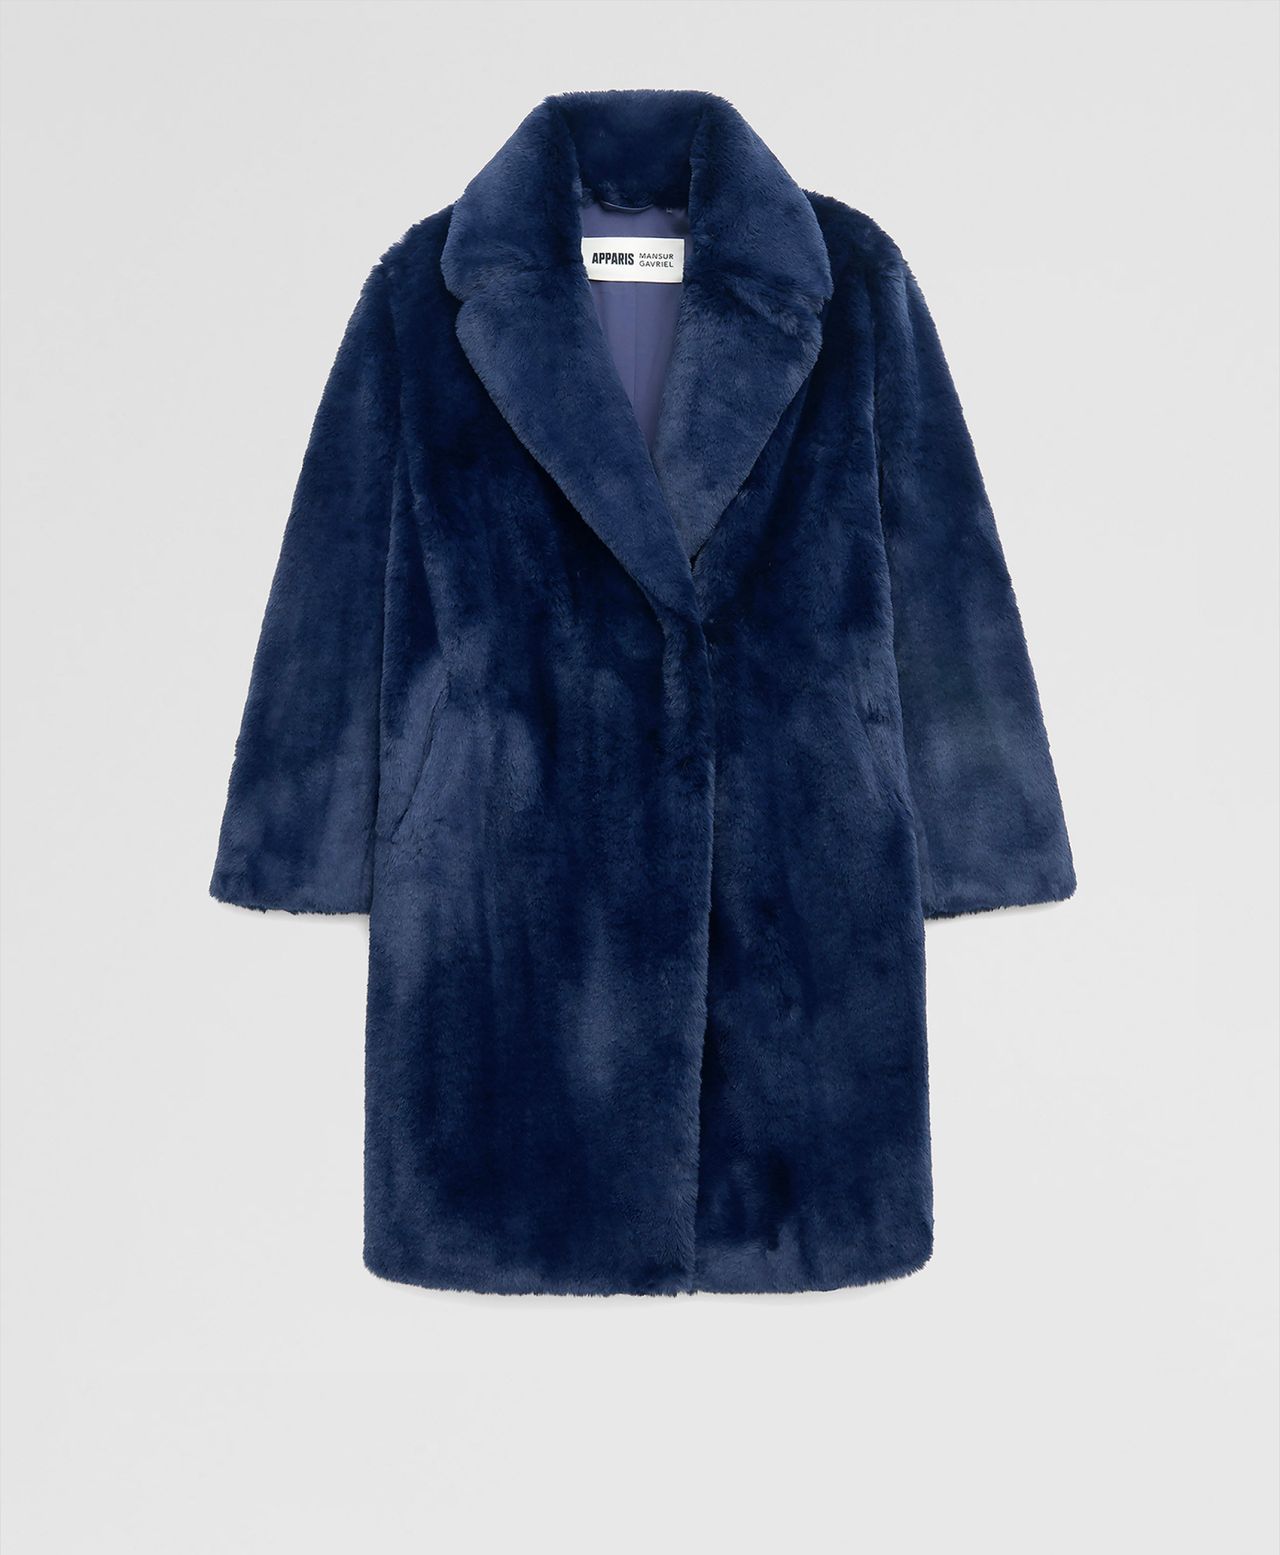 The 30 Best Fall Coats That Are Editor Approved | Who What Wear